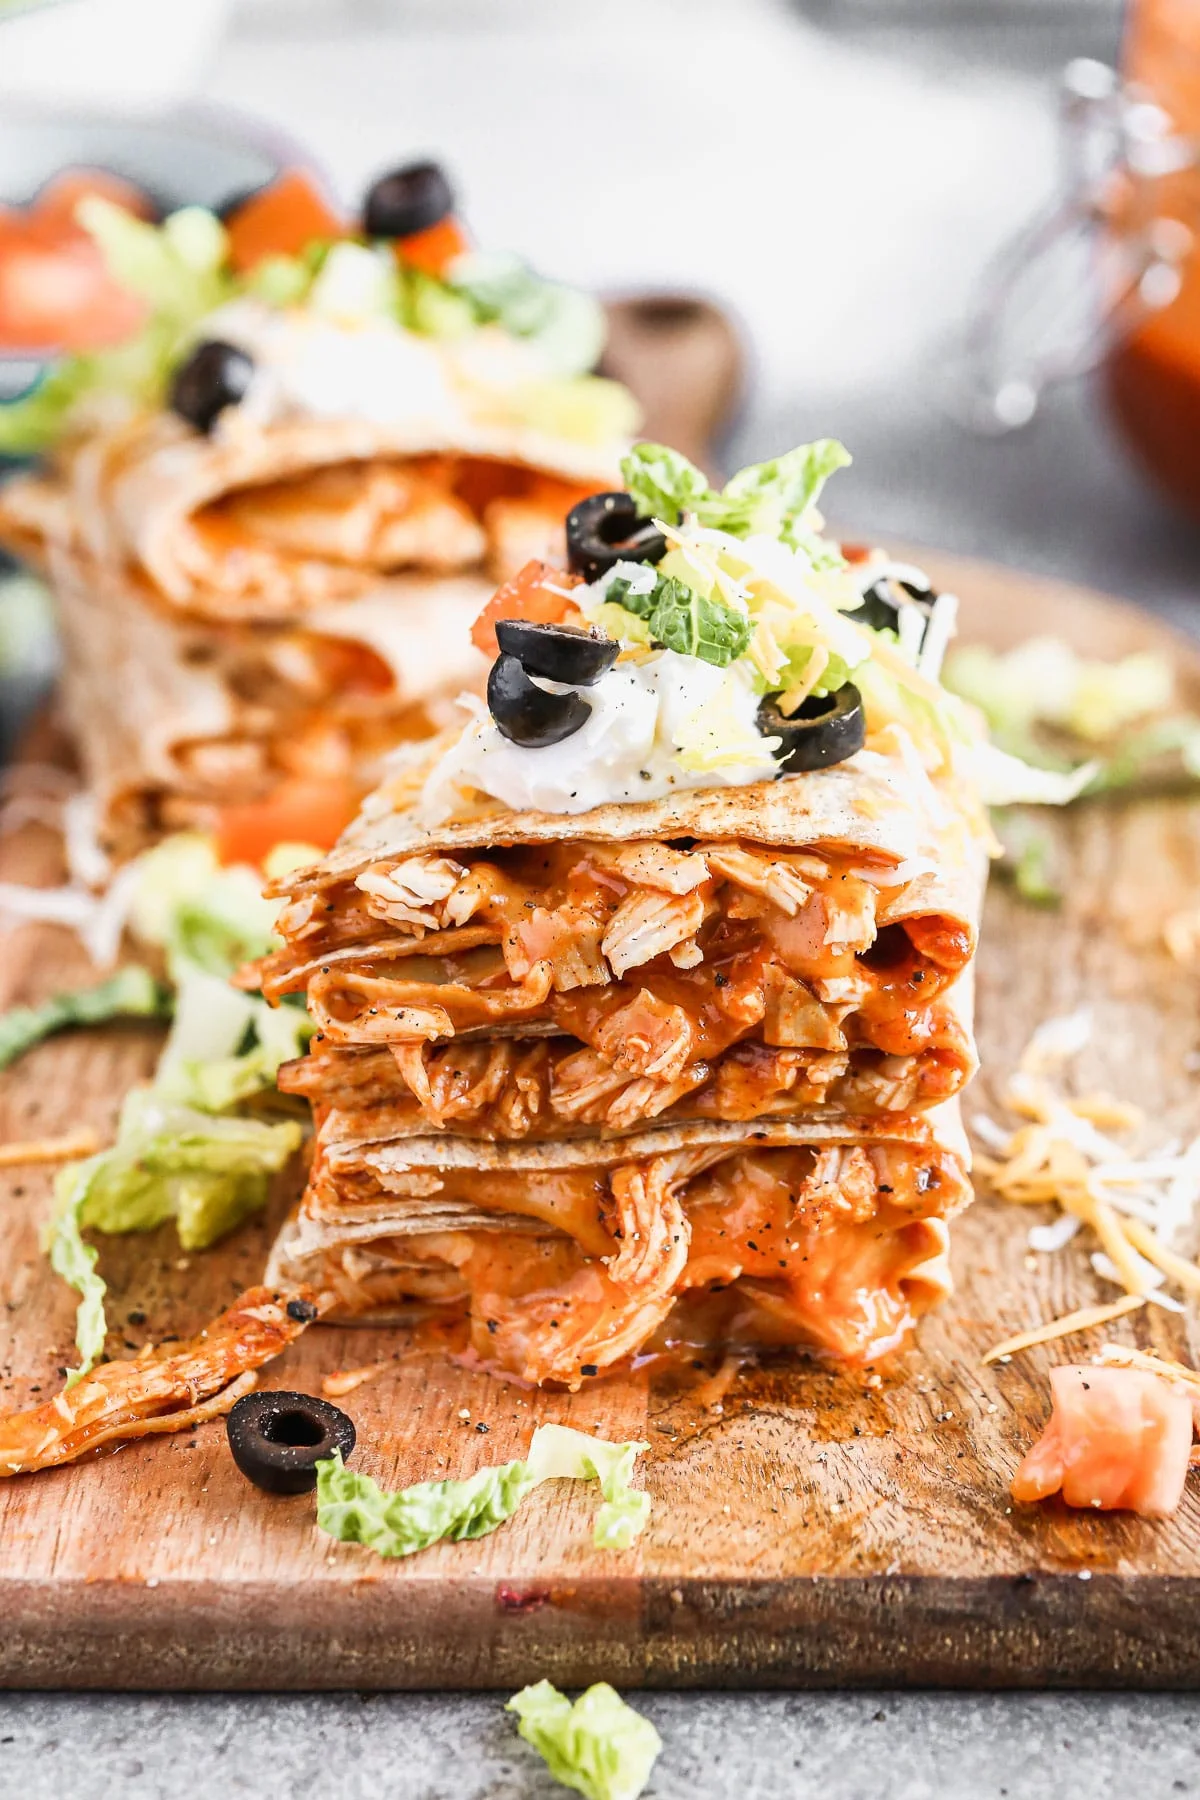 Chicken&nbsp;enchilada on the inside, taco on the outside is what makes our&nbsp;Chicken Enchilada Taco Quesadillas&nbsp;the&nbsp;perfect&nbsp;handheld hybrid of three classic tex-mex dishes. Each whole-wheat tortilla is filled with saucy shredded chicken (made with our epic homemade enchilada sauce) and cheese, pan-fried and then smothered with all your favorite taco fixings!&nbsp;